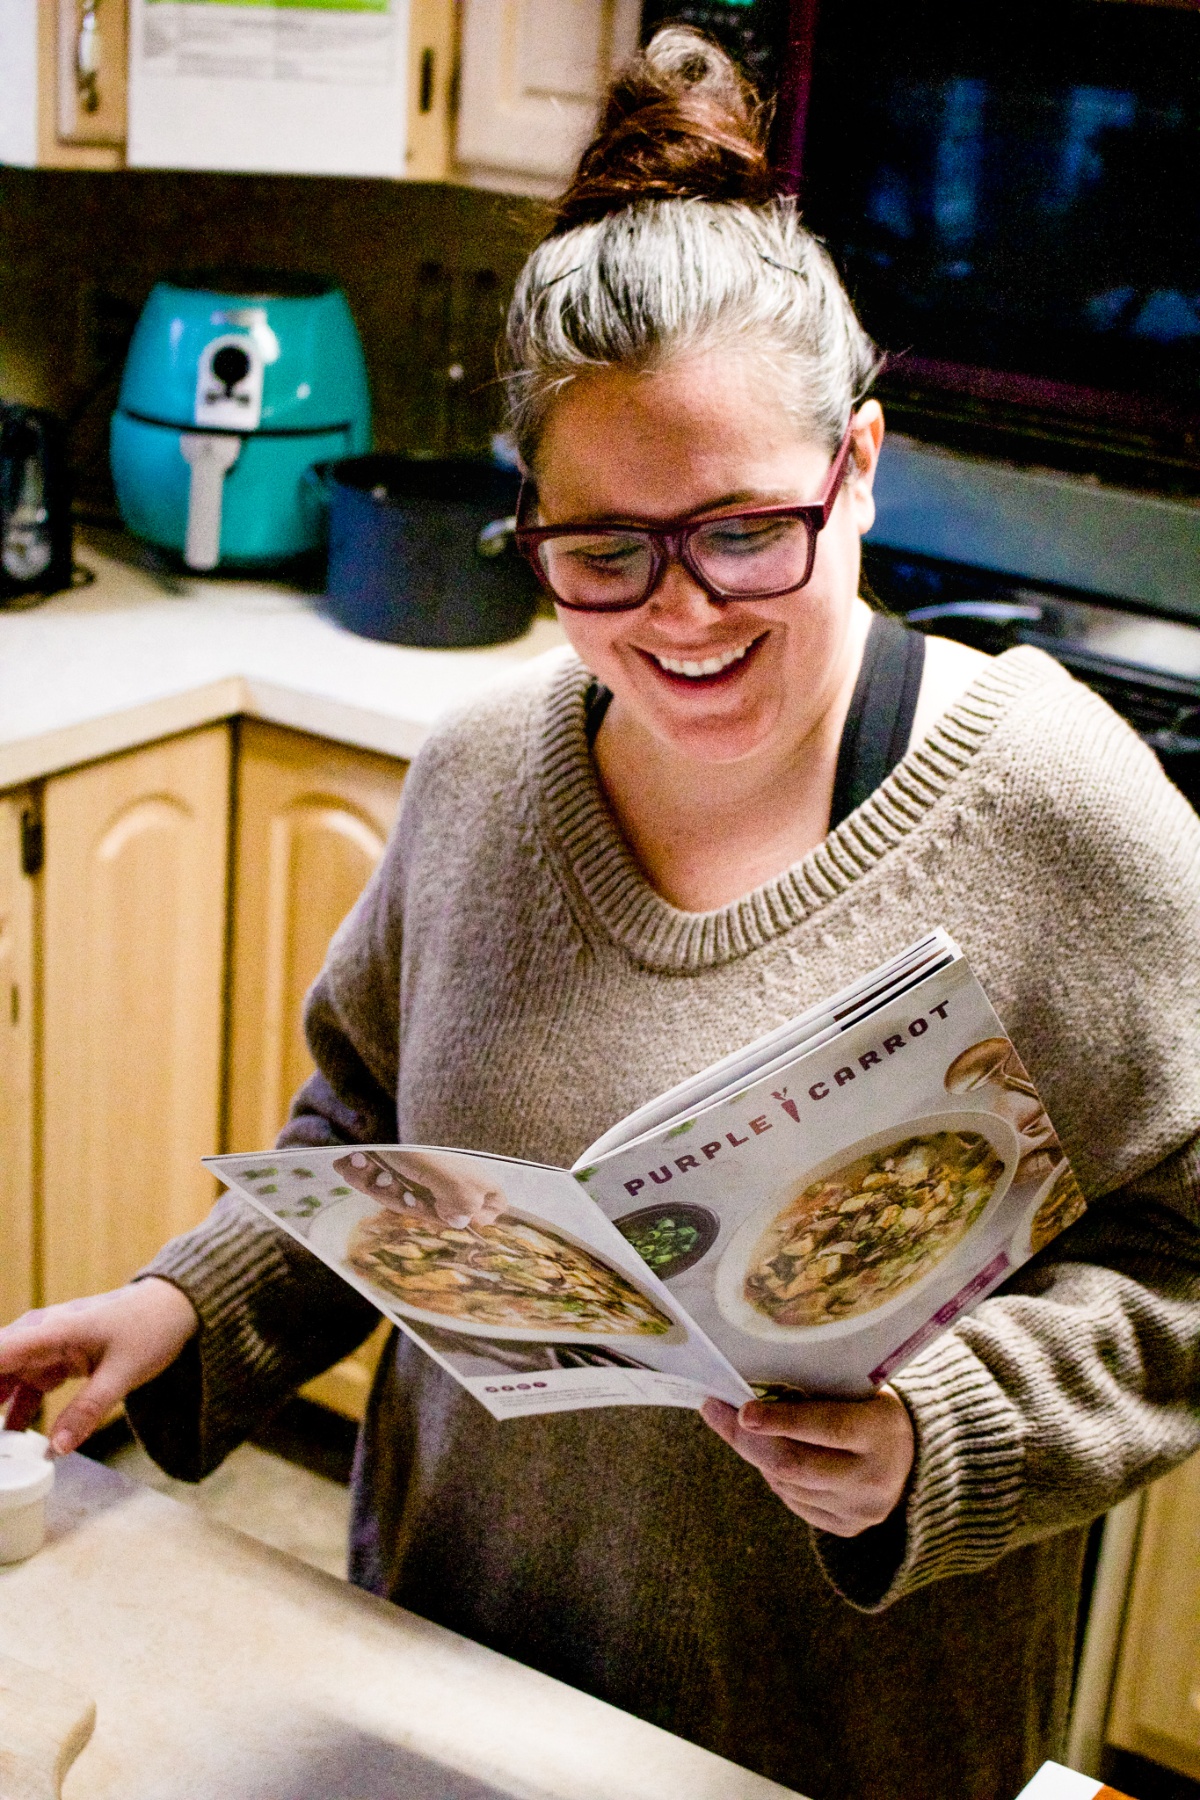 A woman with a bun on top of her head in a beige oversized sweater and purple glasses is standing in the kitchen holding a Purple Carrot recipe booklet and smiling.